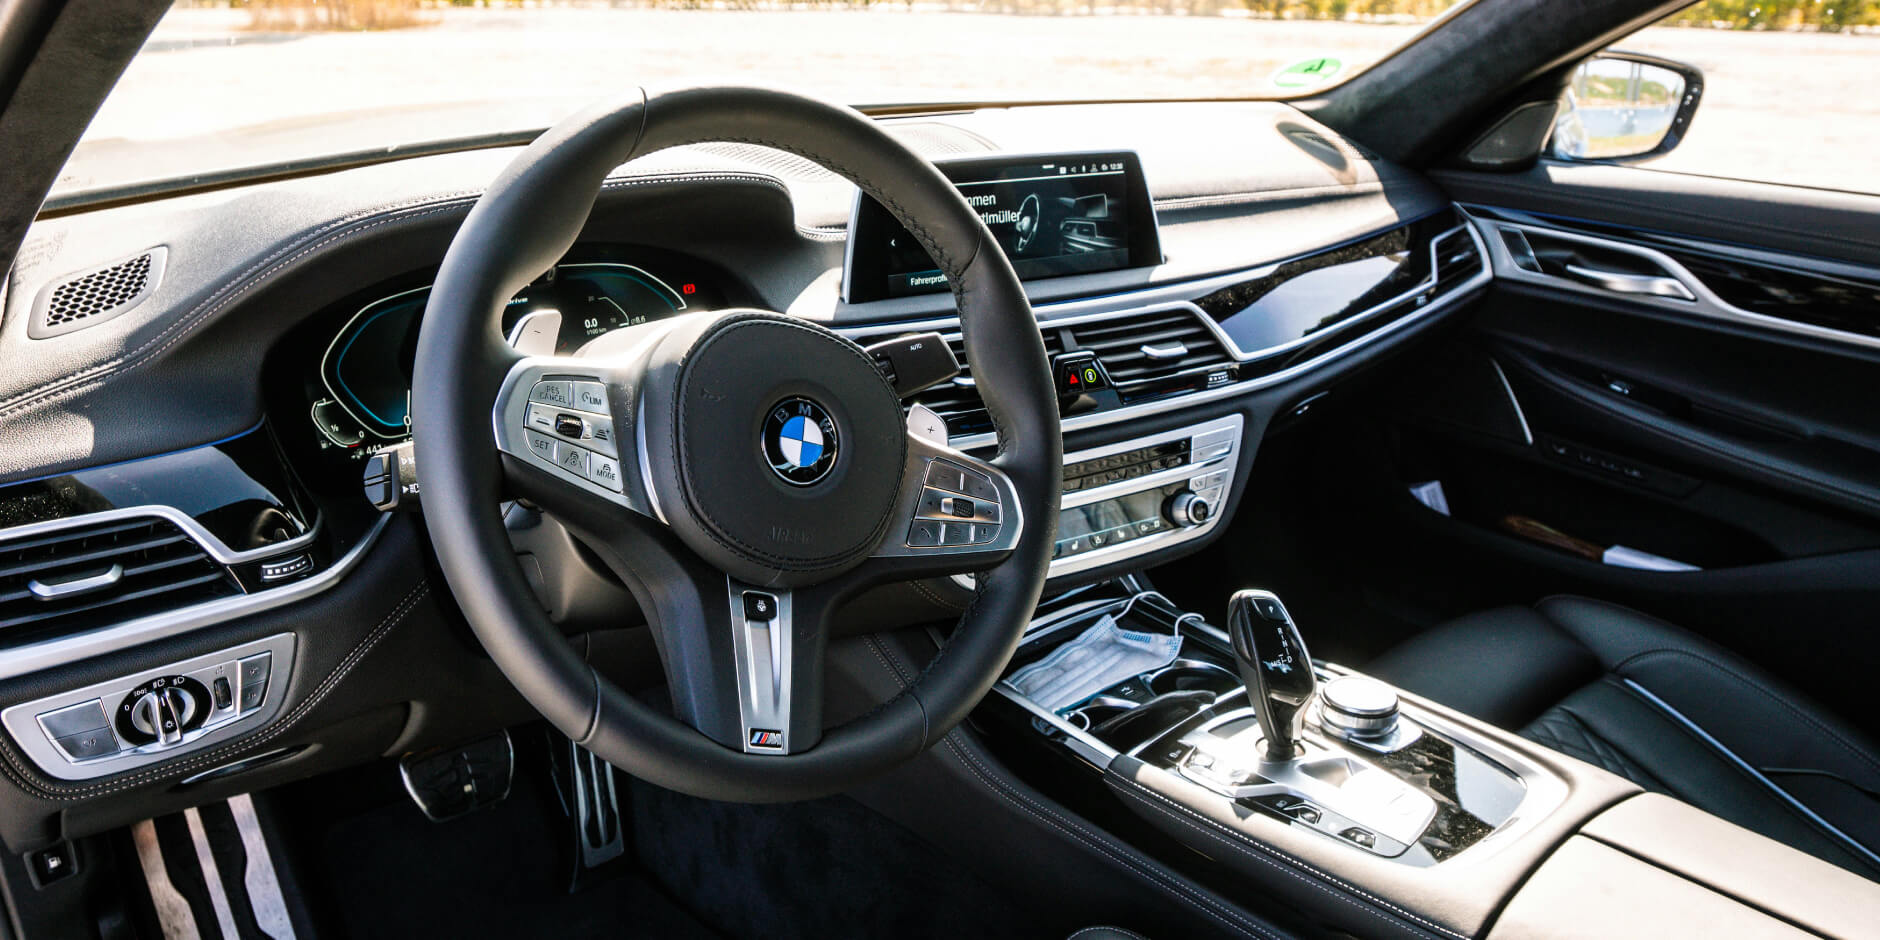 Discover the Top BMW Safety Features for Your Family's Peace of Mind